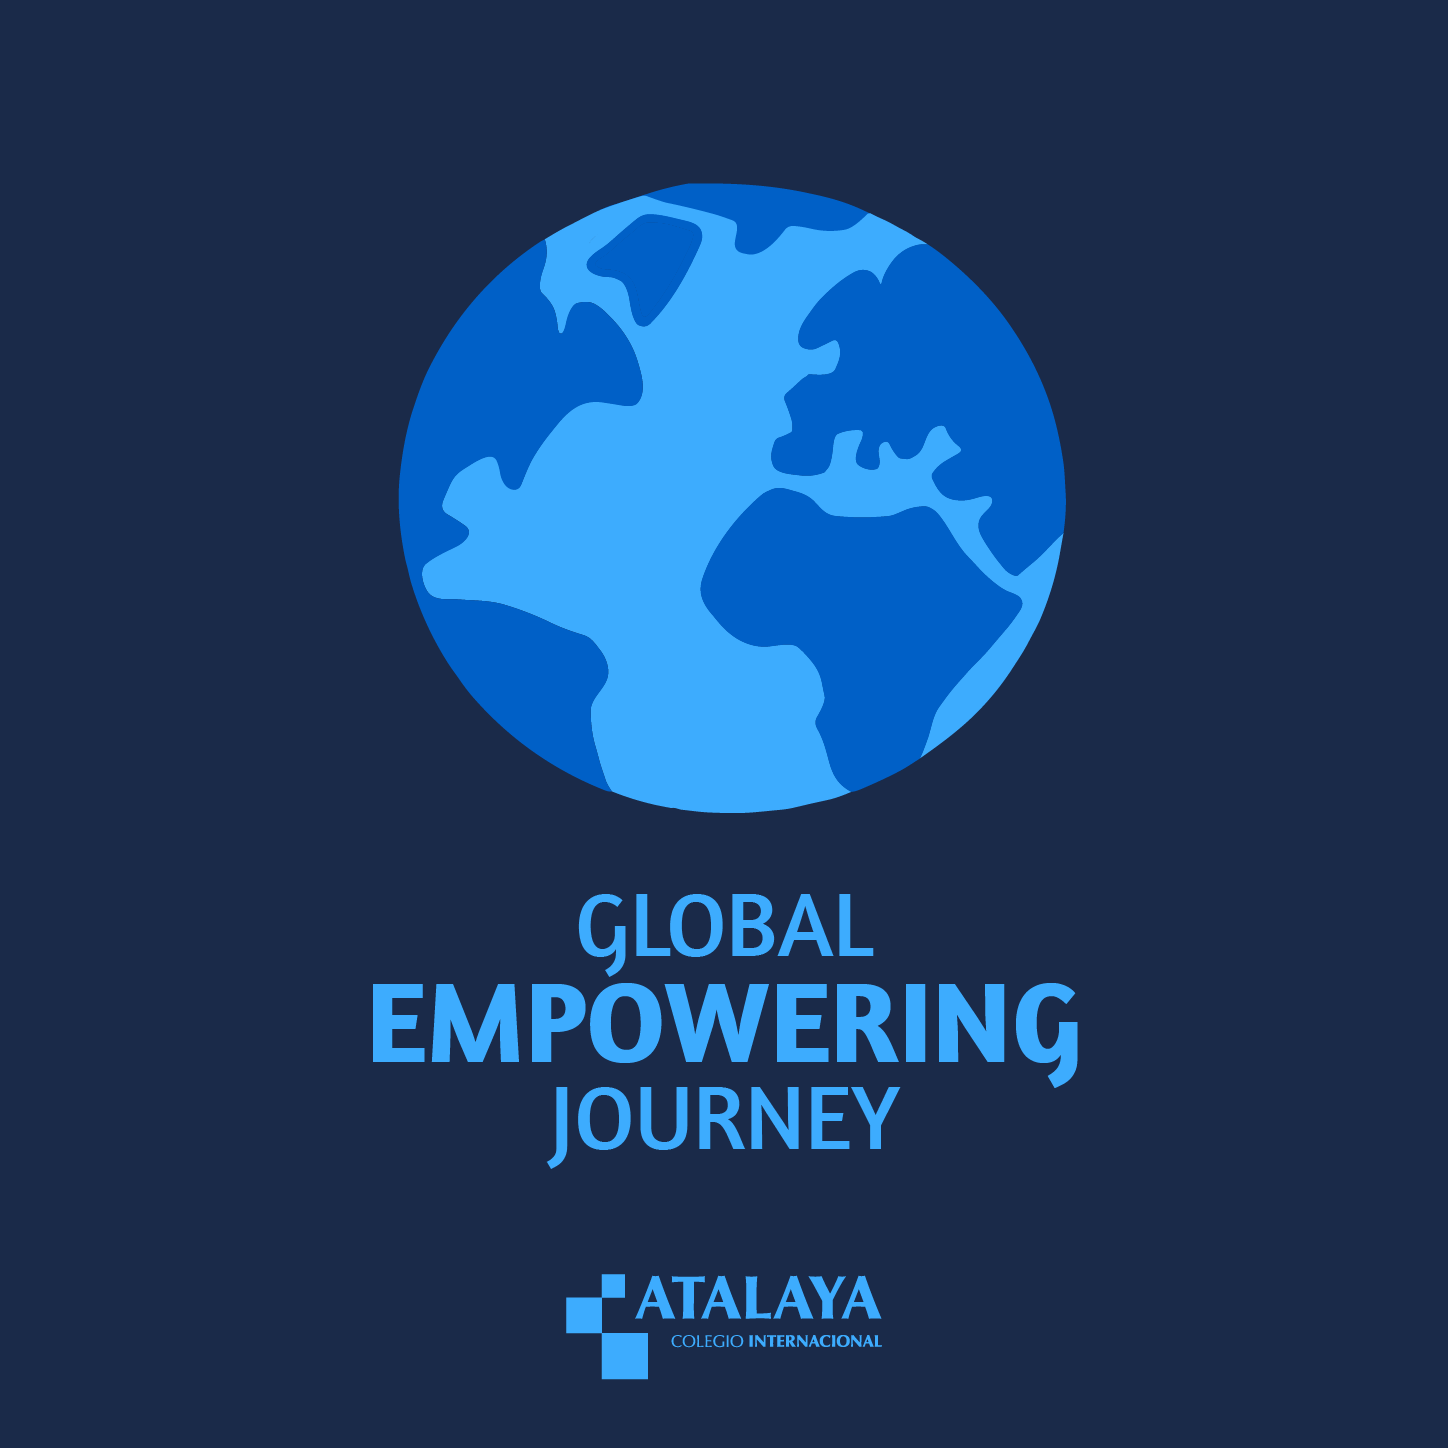 Global Empowering Journey